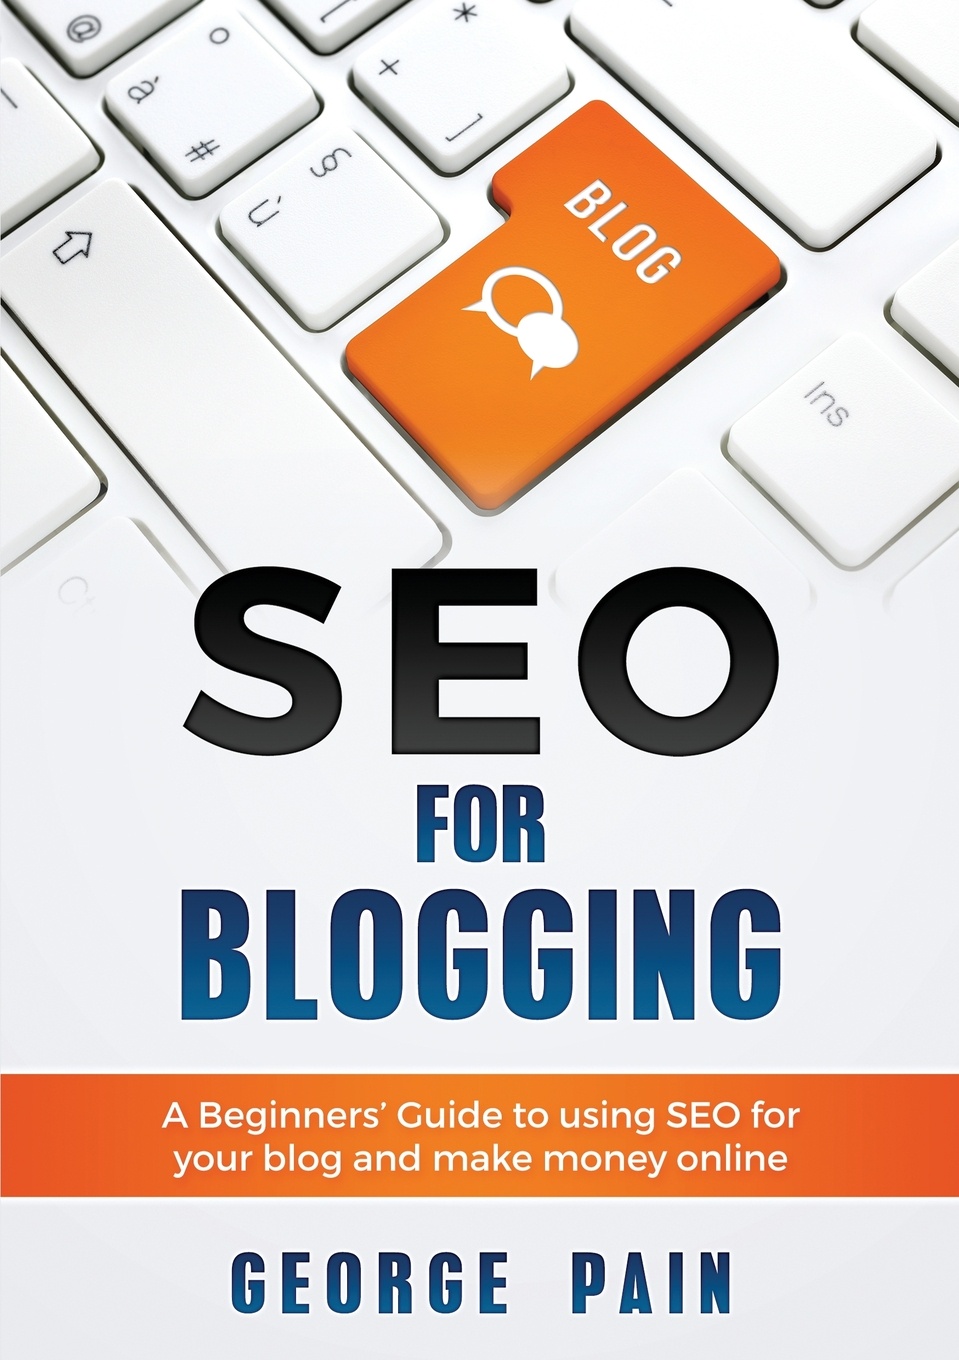 SEO for Blogging. Make Money Online and replace your boss with a blog using SEO